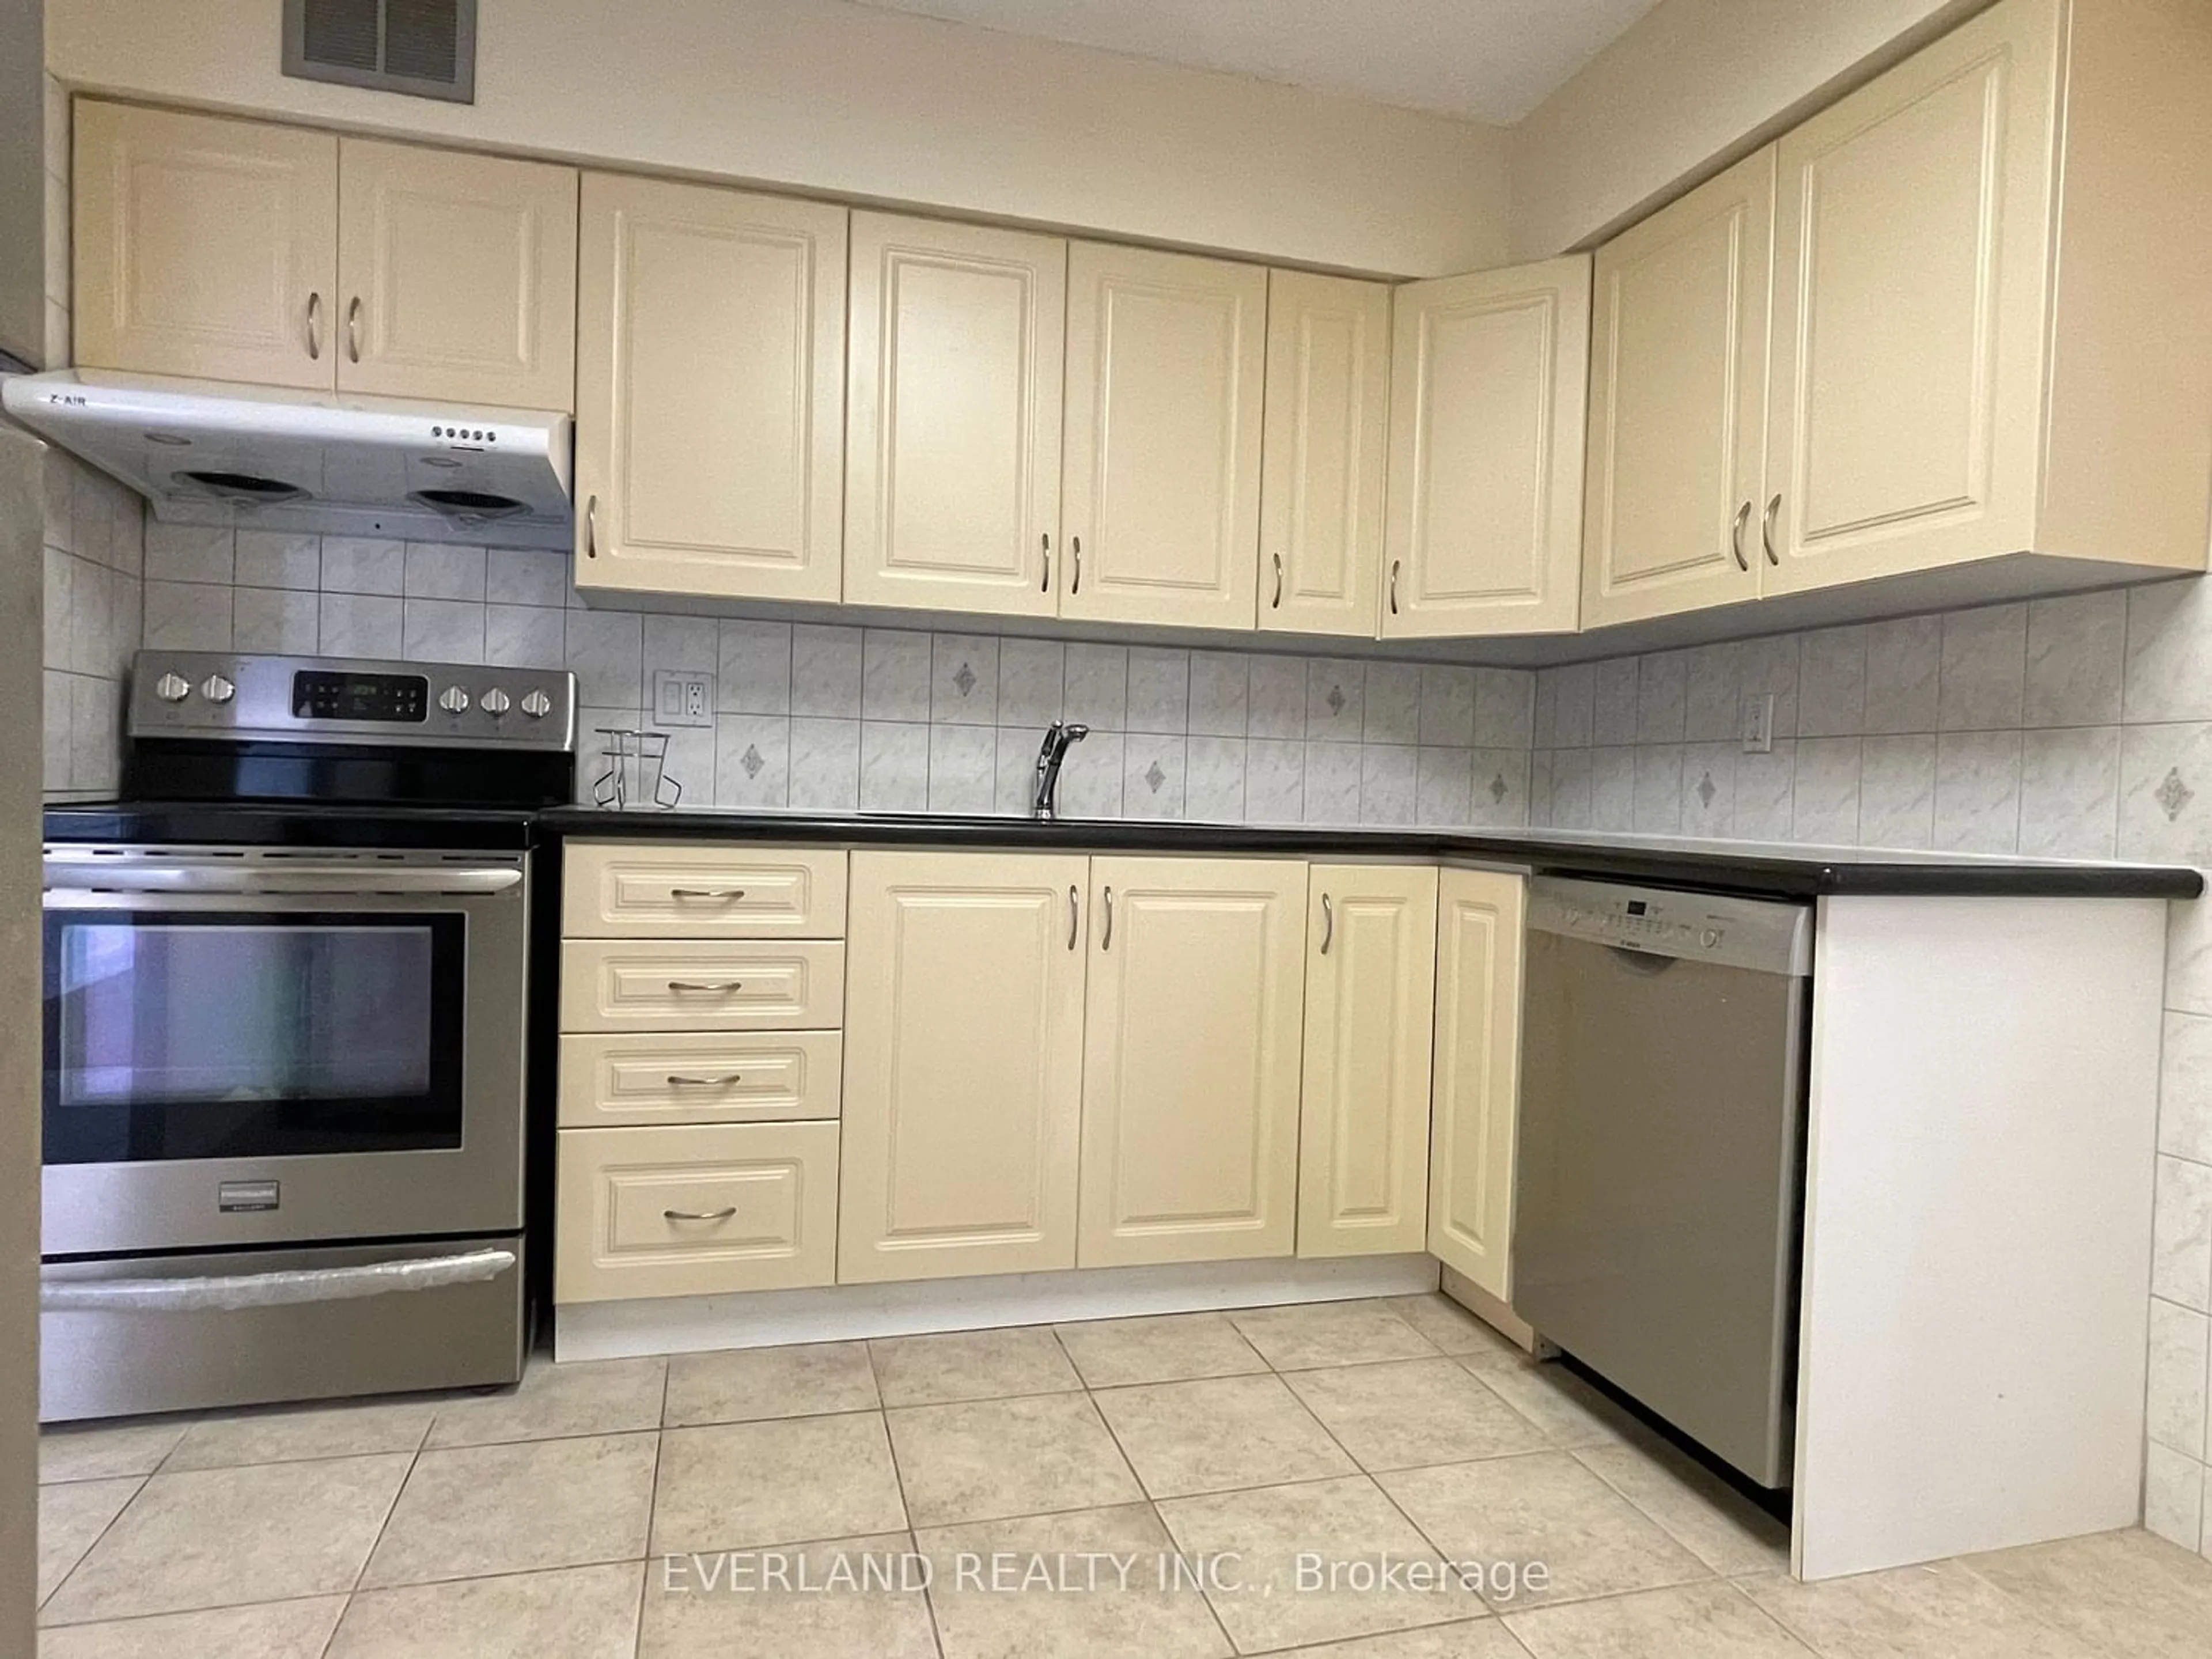 Standard kitchen for 1900 Sheppard Ave #2201, Toronto Ontario M2J 4T4